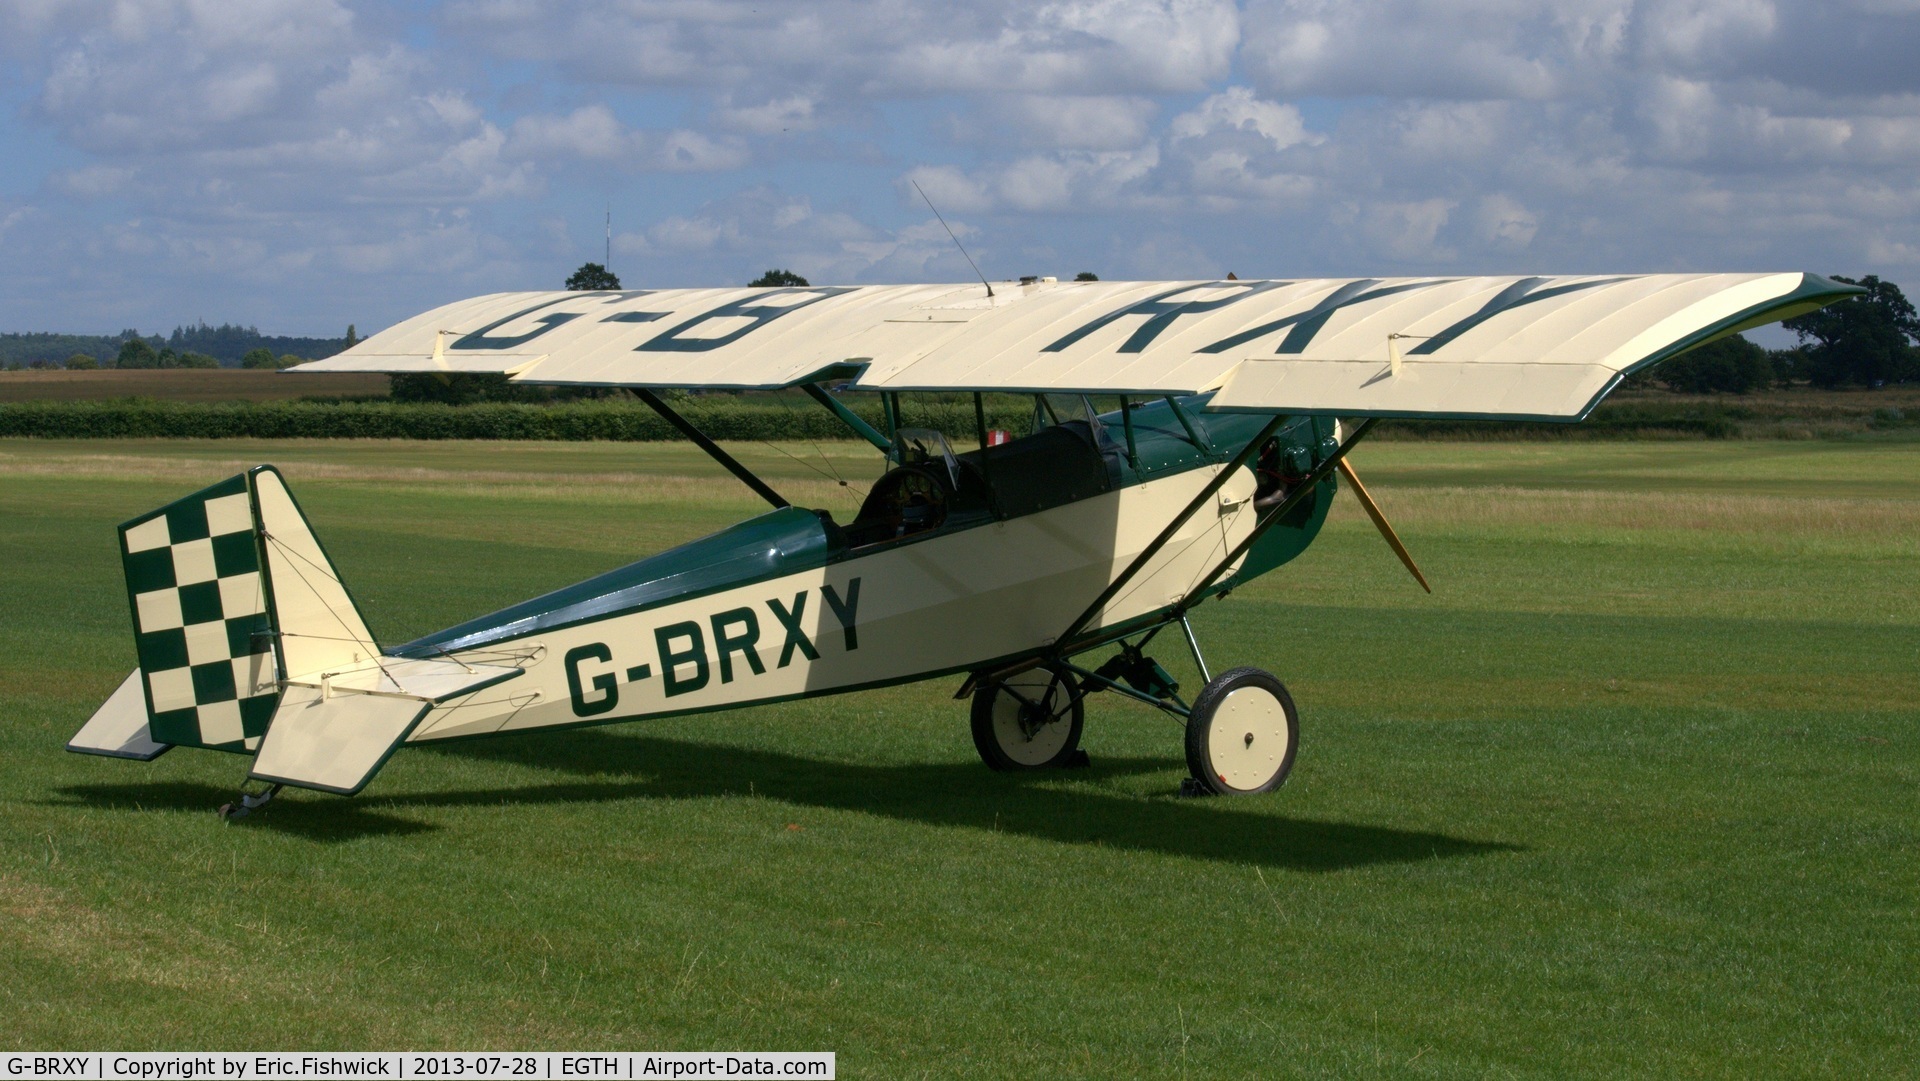 G-BRXY, 1991 Pietenpol Air Camper C/N PFA 047-11416, 2. G-BRXY at The Shuttleworth Collection Wings & Wheels Flying Day, July 2013.